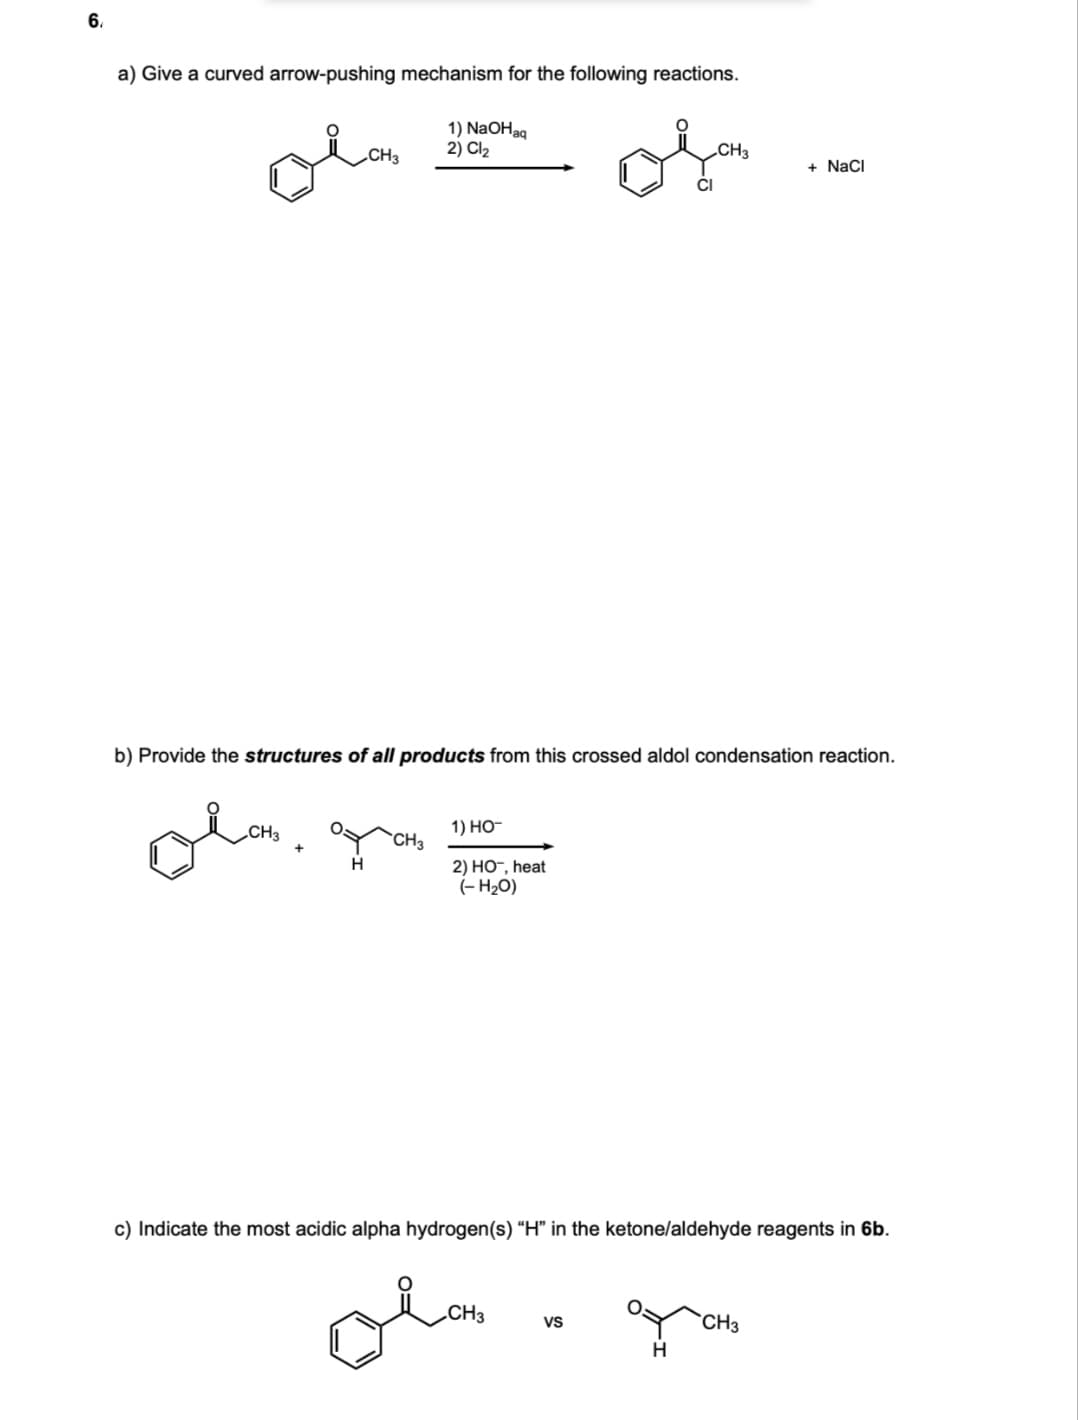 6.
a) Give a curved arrow-pushing mechanism for the following reactions.
1) NaOHag
2) Cl2
CH3
CH3
+ NaCI
b) Provide the structures of all products from this crossed aldol condensation reaction.
„CH3
1) НО-
`CH3
H
2) НО, heat
(- H20)
c) Indicate the most acidic alpha hydrogen(s) “H" in the ketone/aldehyde reagents in 6b.
olo
„CH3
VS
CH3
H
